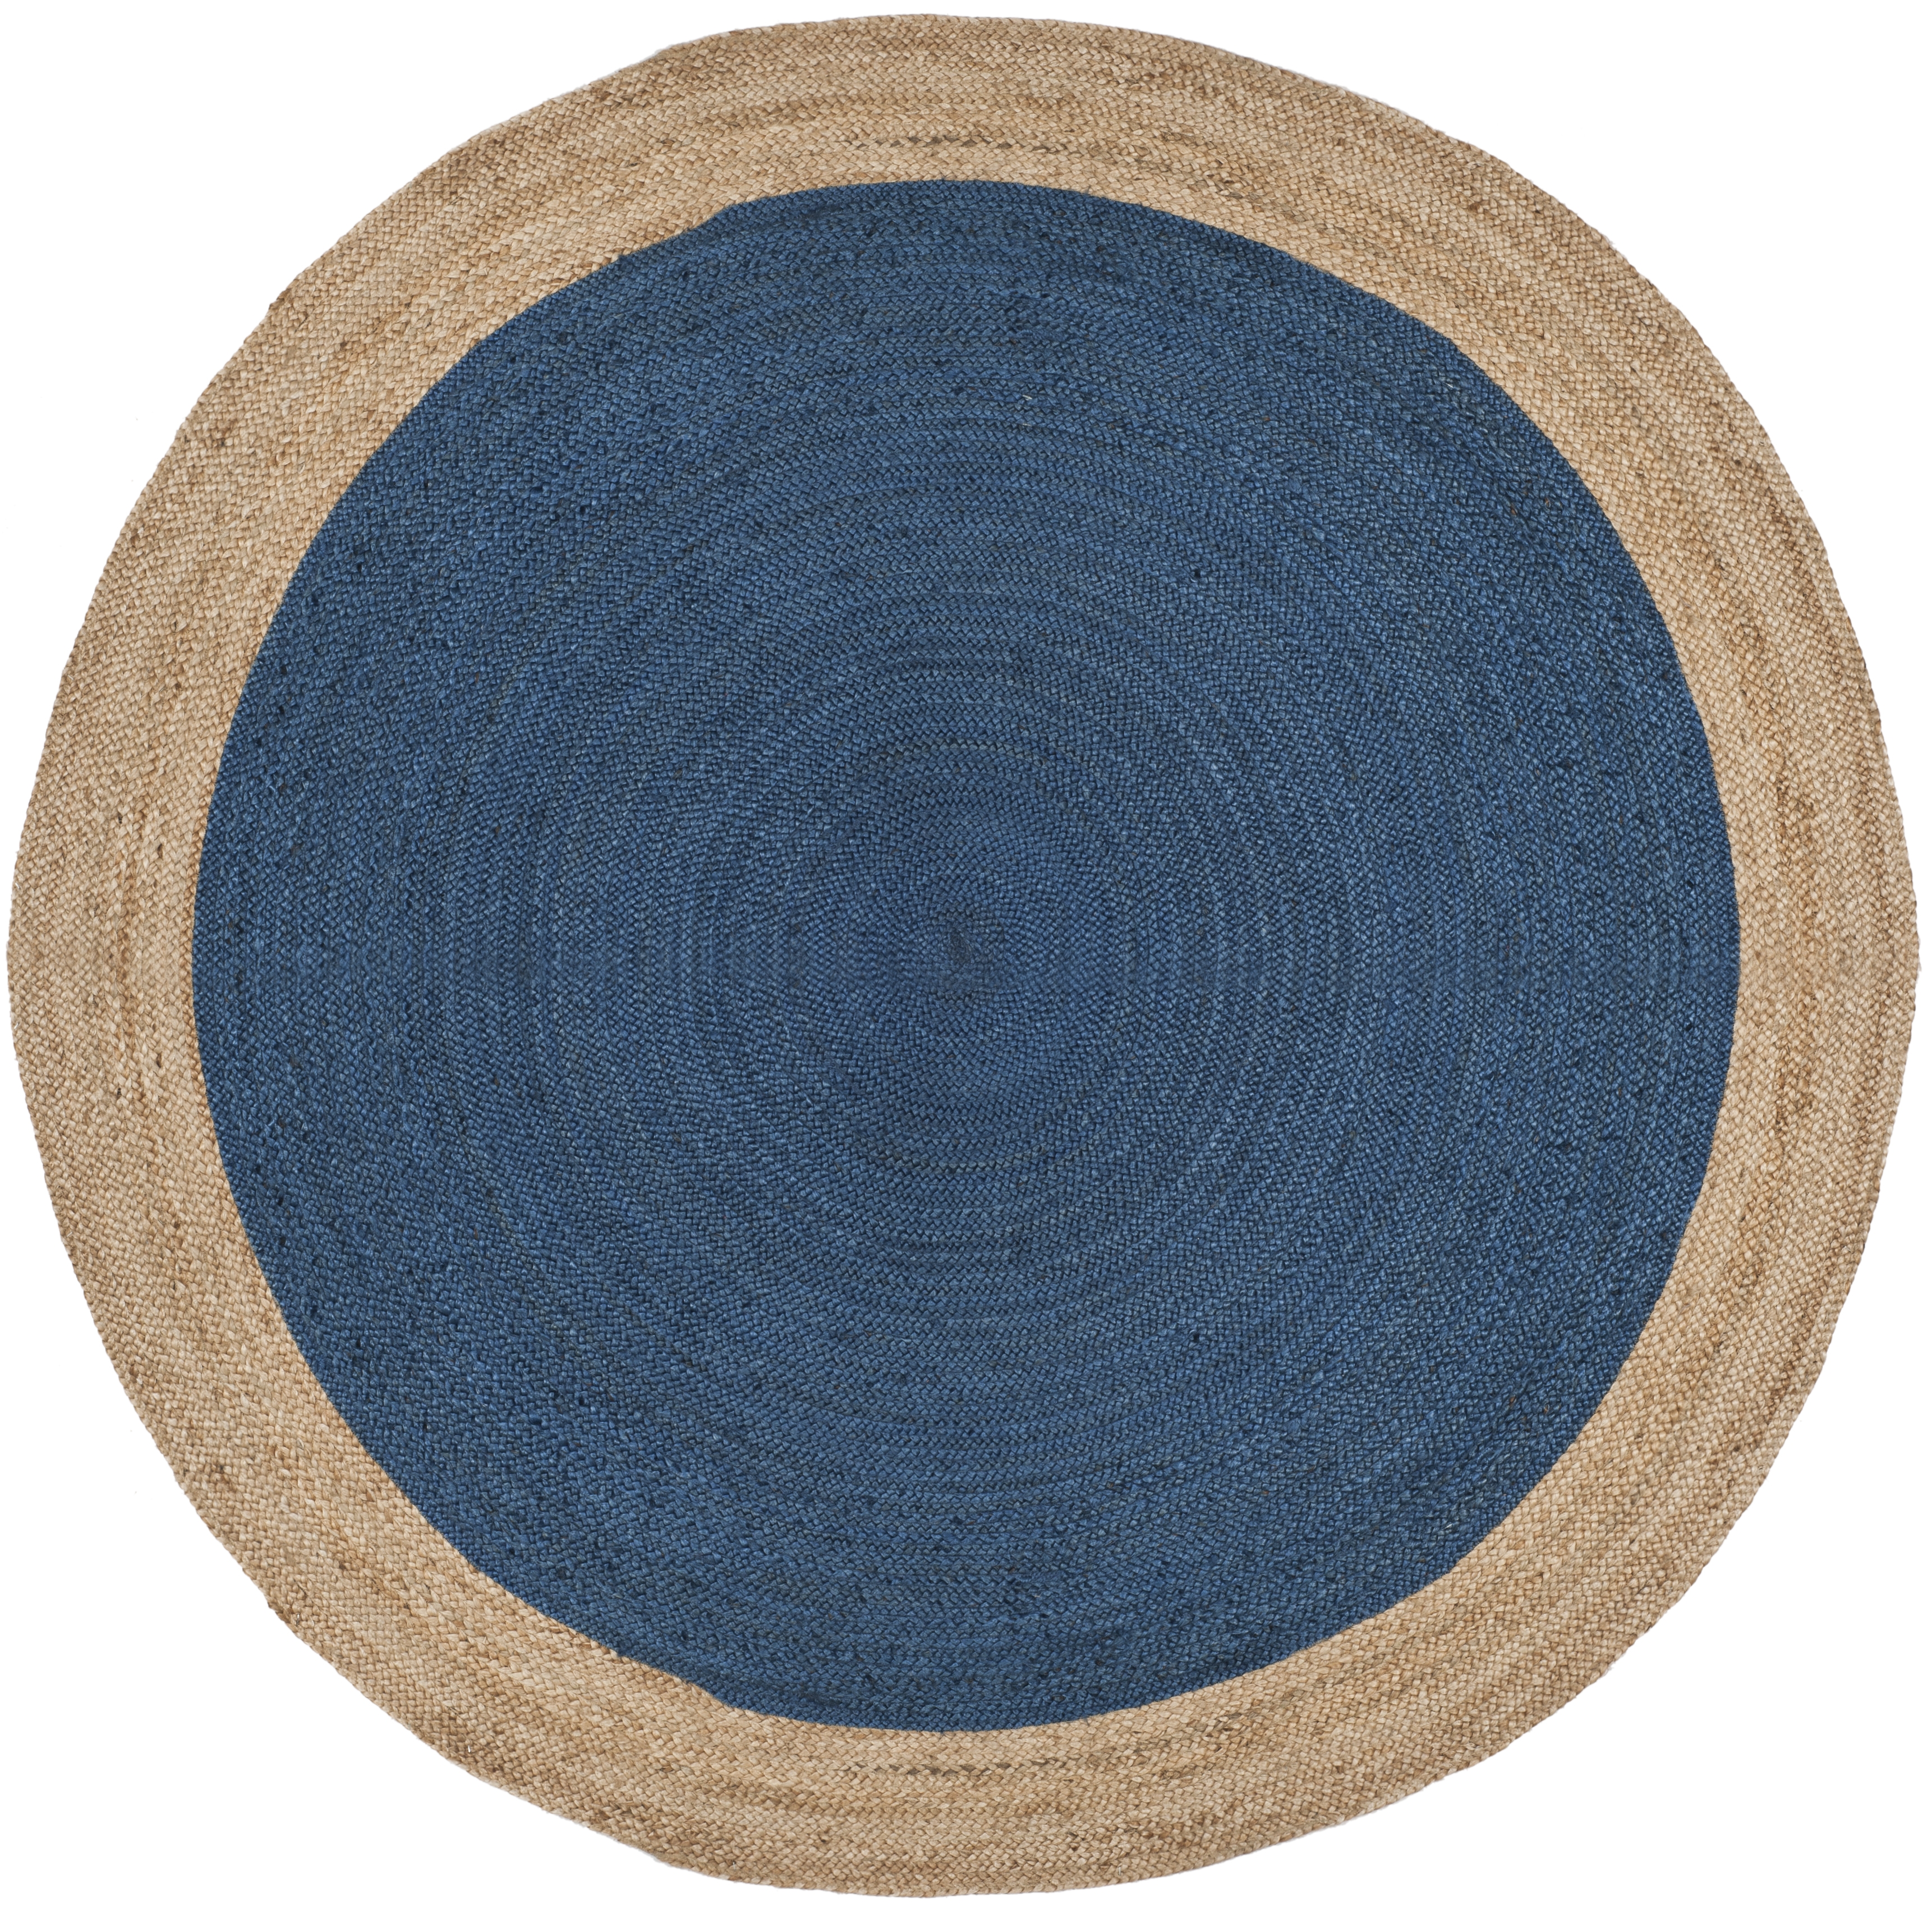 Arlo Home Hand Woven Area Rug, NF801D, Royal Blue/Natural,  8' X 8' Round - Image 0